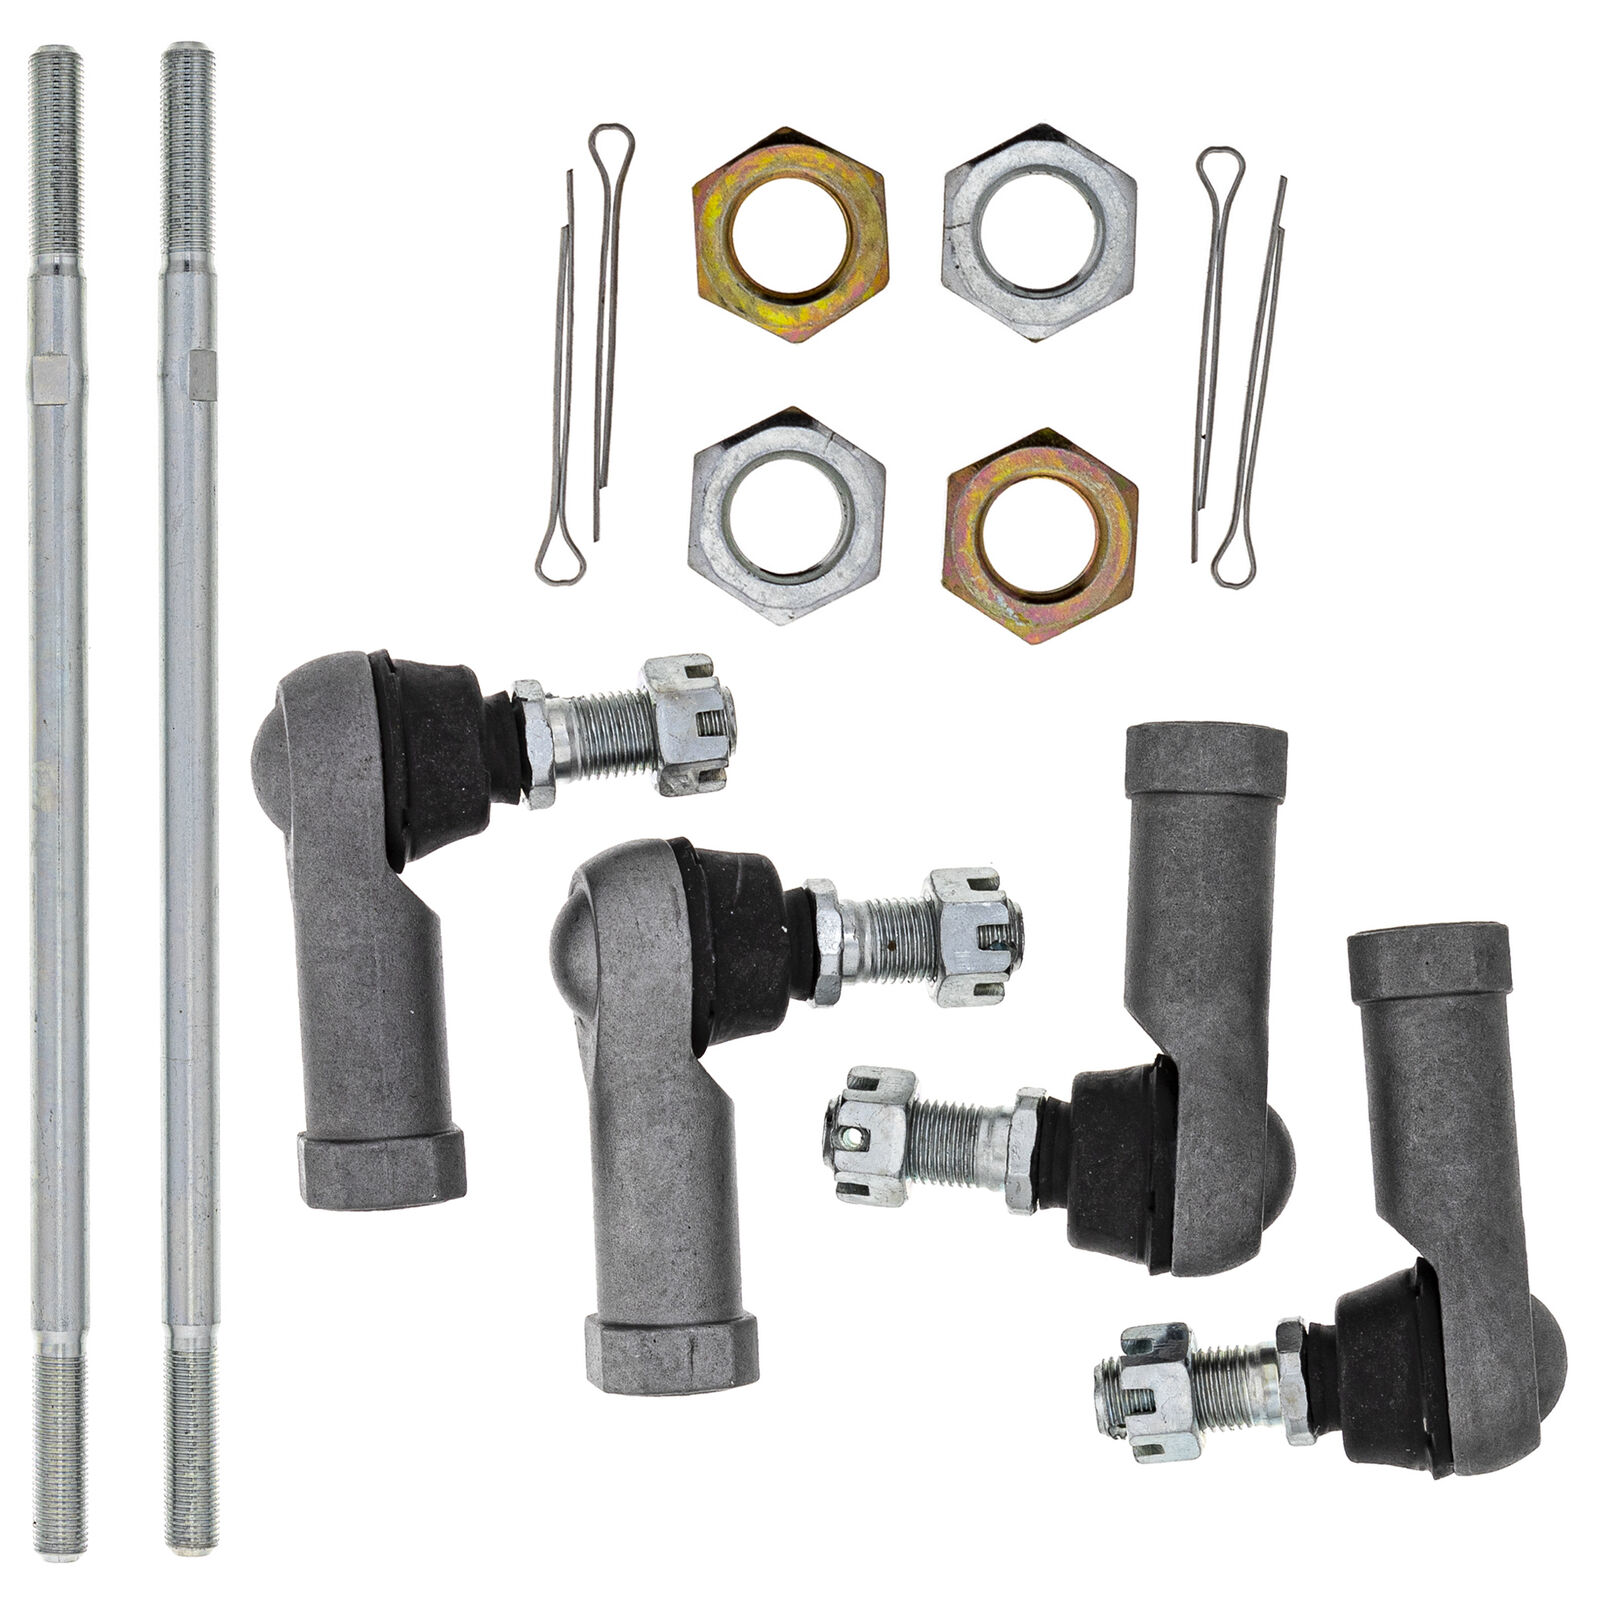 NICHE Tie Rods with End Kit for Honda foreman 500 foreman Rubicon 500 Rincon 680